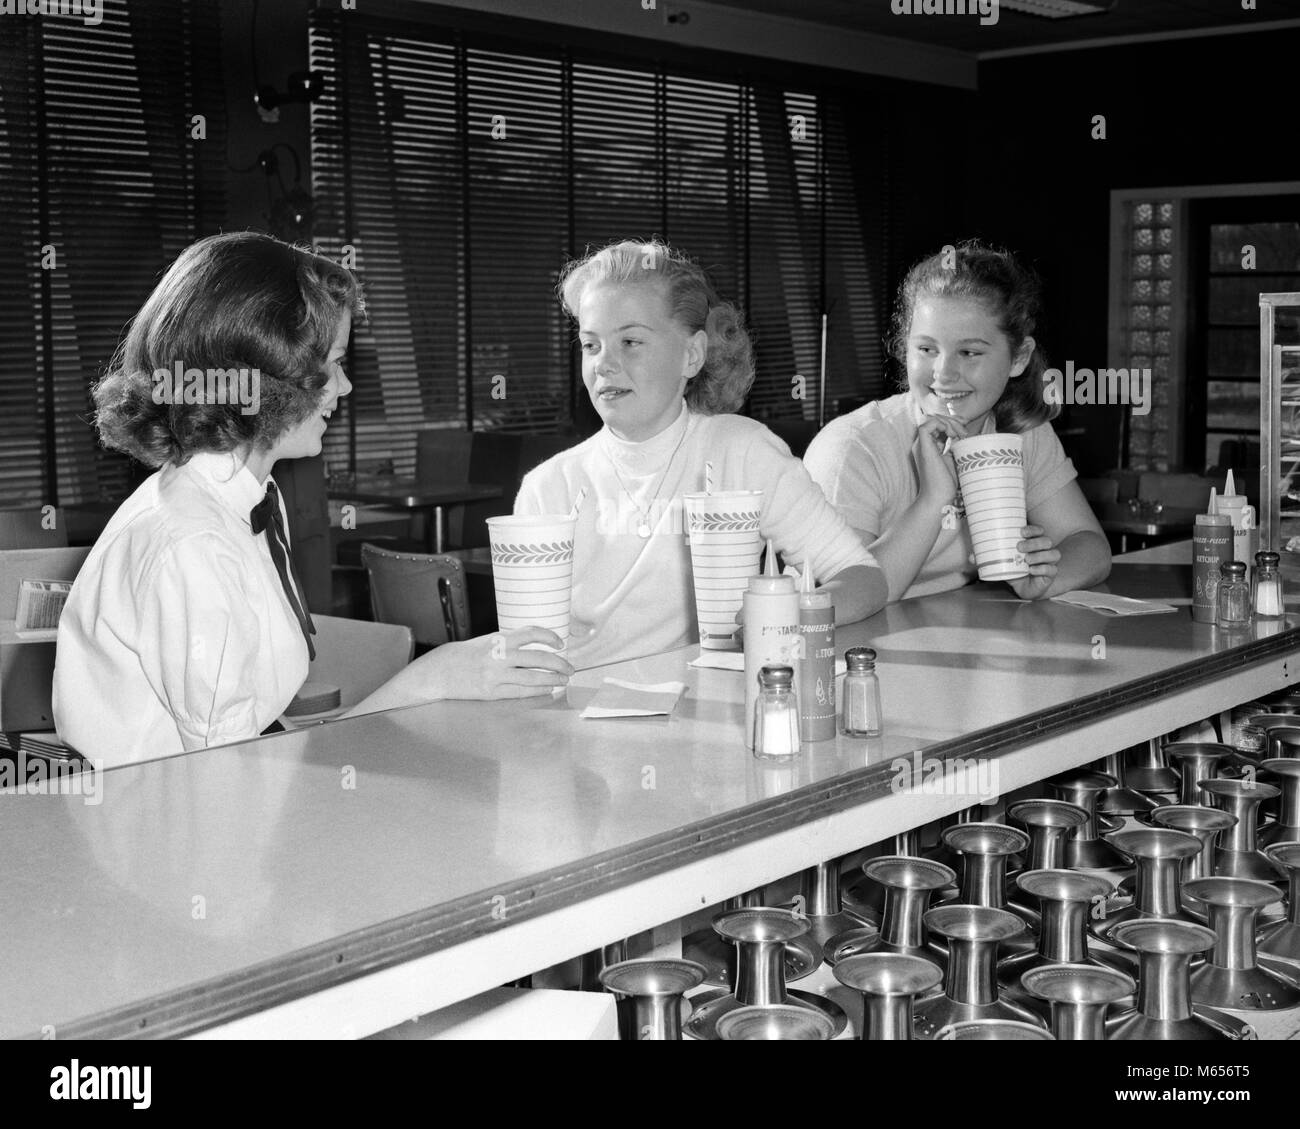 1950s THREE PRE-TEEN GIRLS DRINKING MILKSHAKES SITTING TALKING AT SODA FOUNTAIN COUNTER - f4520 HAR001 HARS TOGETHERNESS 10-12 YEARS 13-15 YEARS HAPPINESS GROWTH MALT MILKSHAKES TEENAGED SMALL GROUP OF PEOPLE JUVENILES PRE-TEEN PRE-TEEN GIRL B&W BLACK AND WHITE CAUCASIAN ETHNICITY DAIRY BAR OLD FASHIONED PERSONS Stock Photo